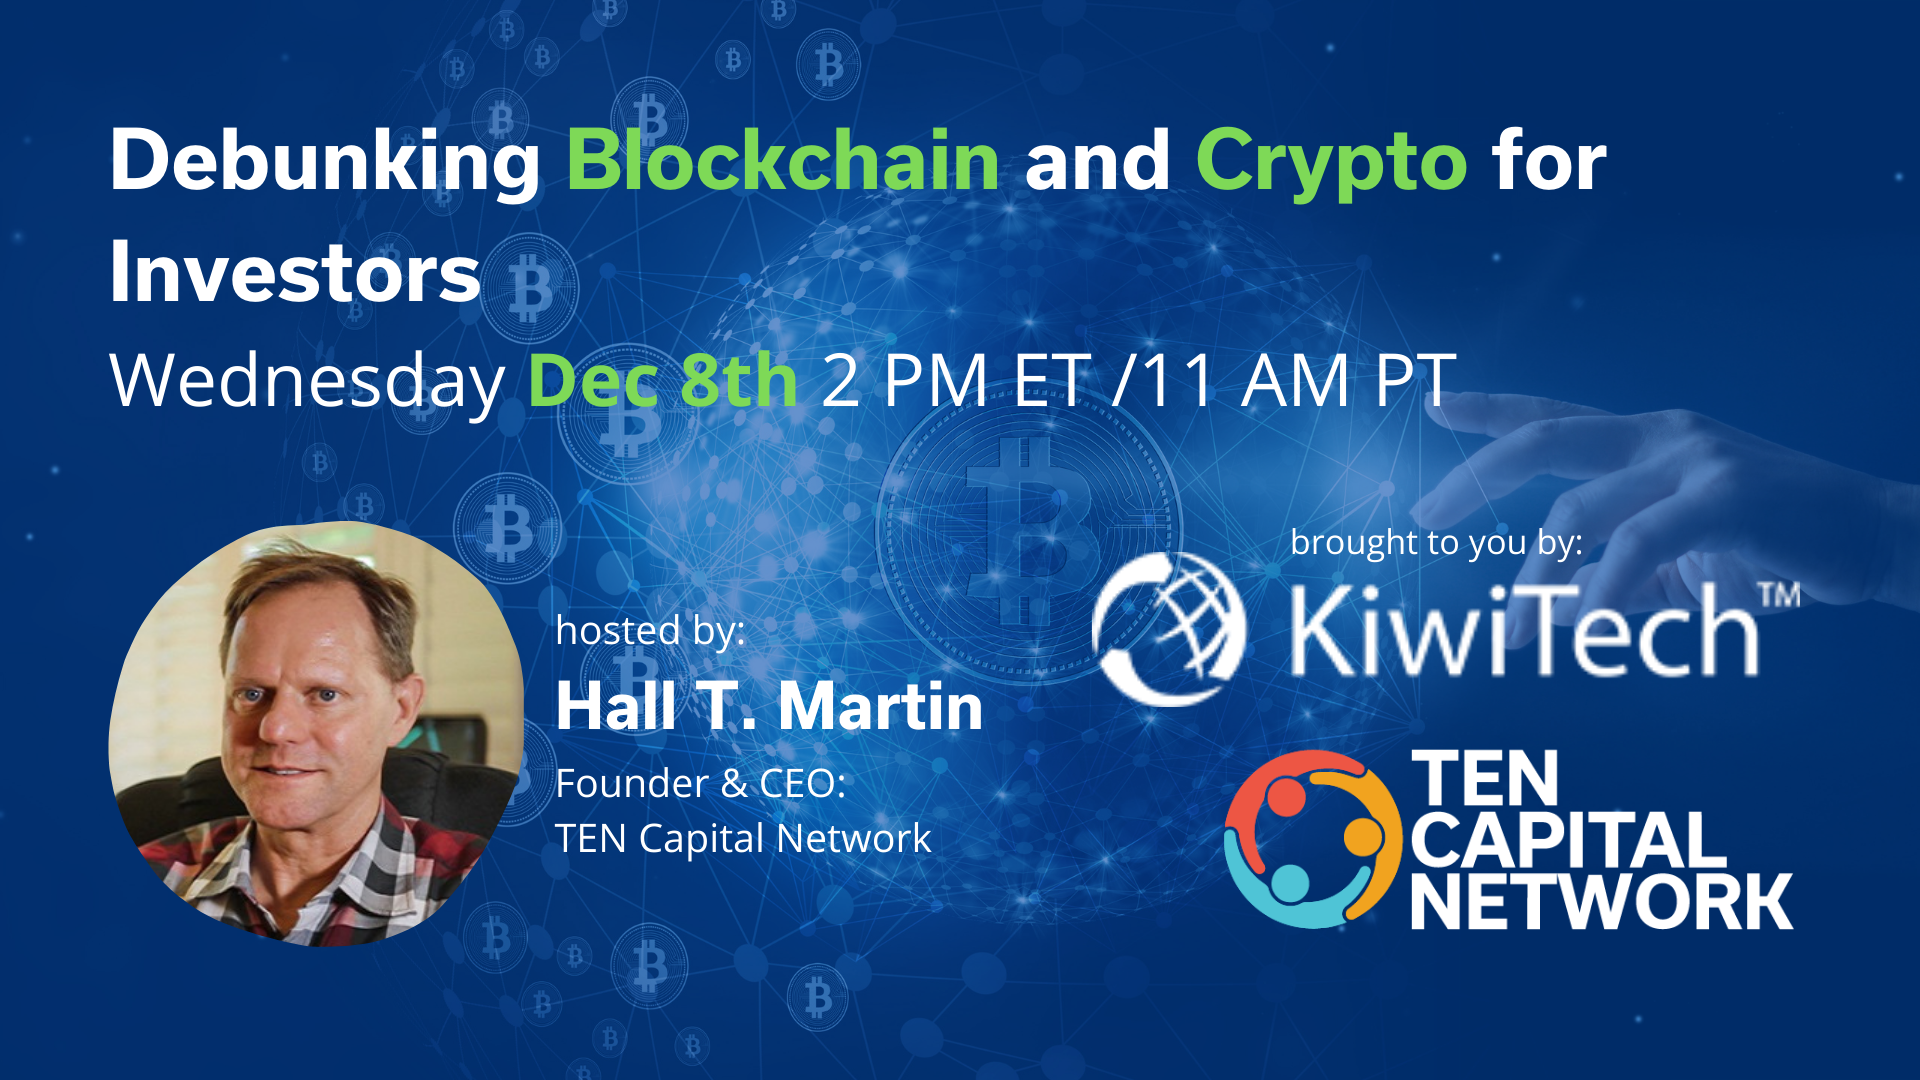 TEN Capital & KiwiTech Presents: Debunking Blockchain and Crypto Myths for Investors